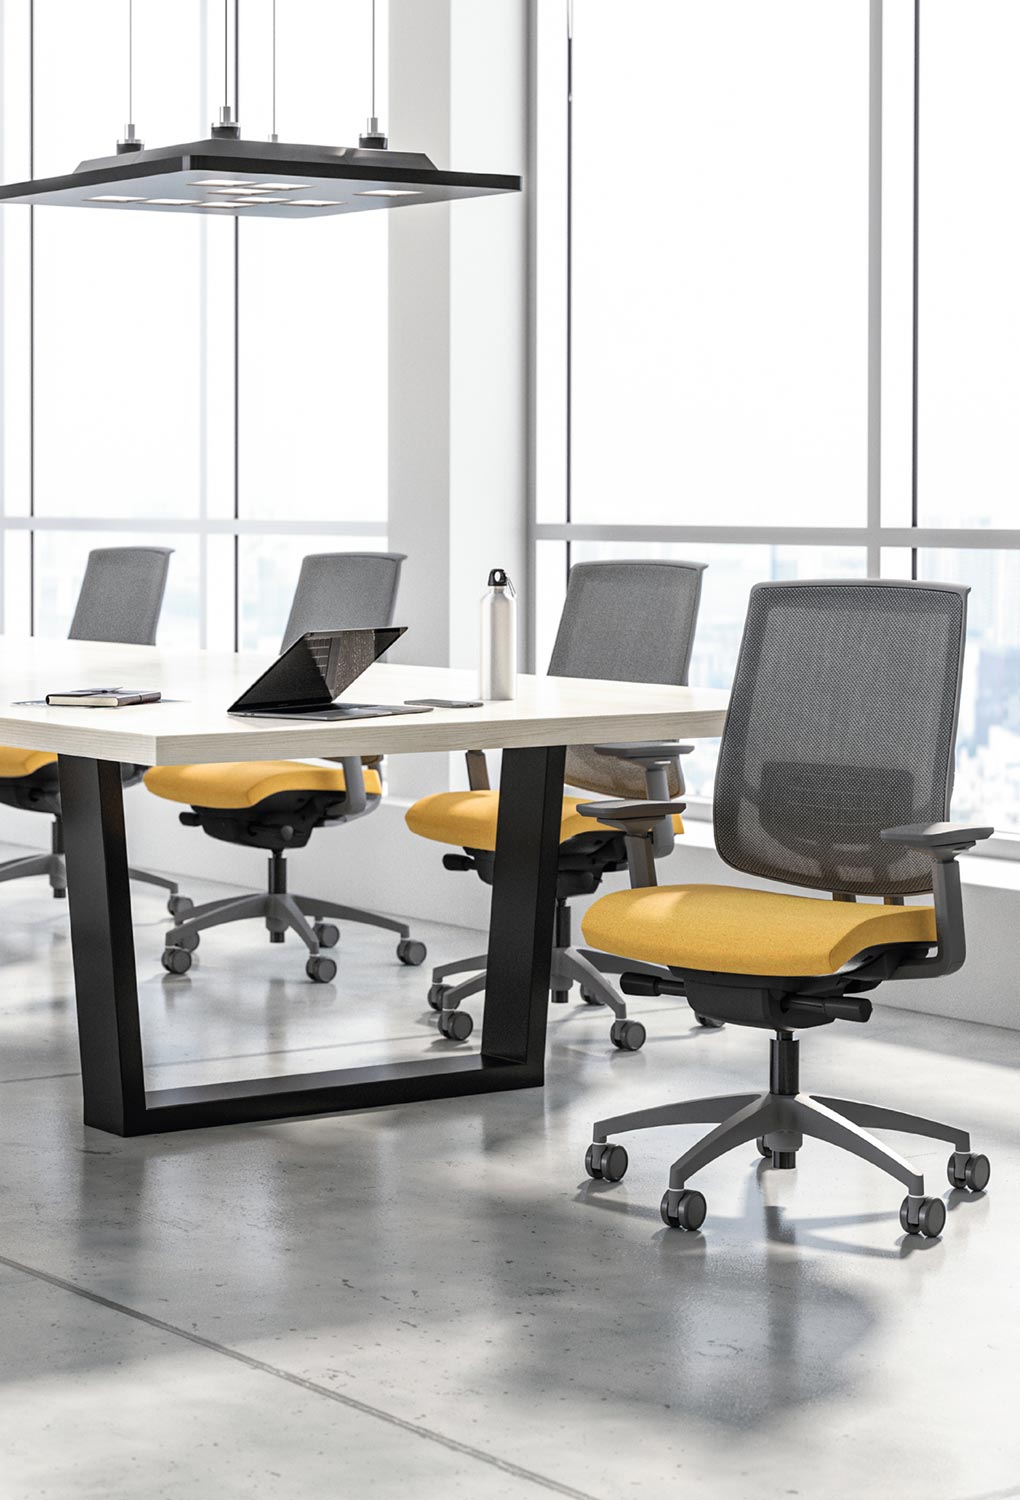 New Ways to Connect with Harrison Workplace Furnishings